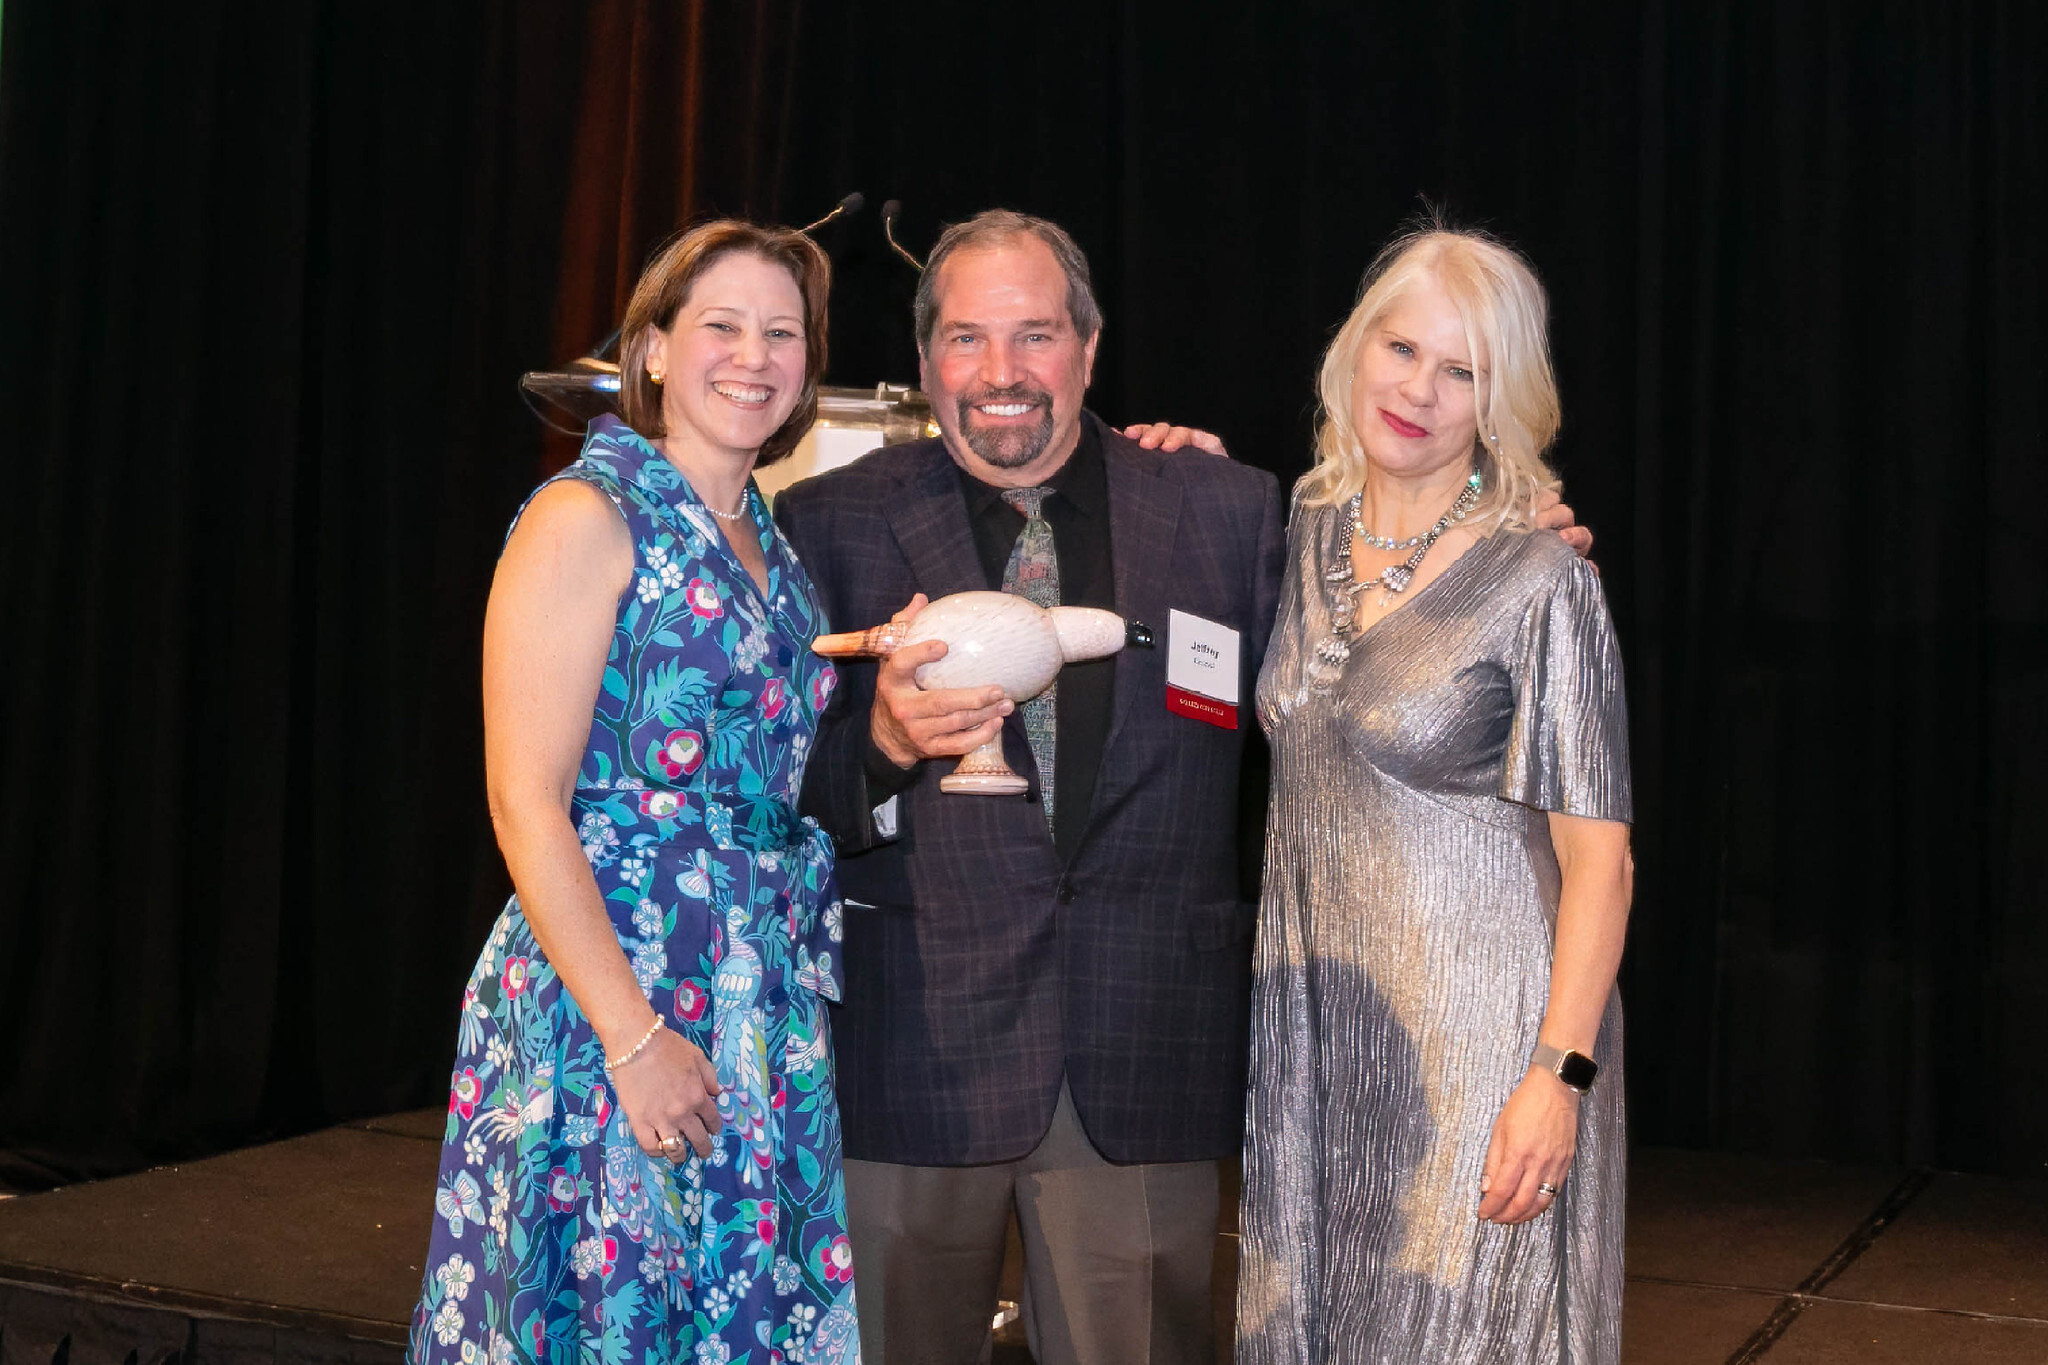 From left to right: NYC Bird Alliance Executive Director Jessica Wilson, honoree Jeffrey Kimball, and NYC Bird Alliance President Karen Benfield. Photo: Cyrus Gonzeles